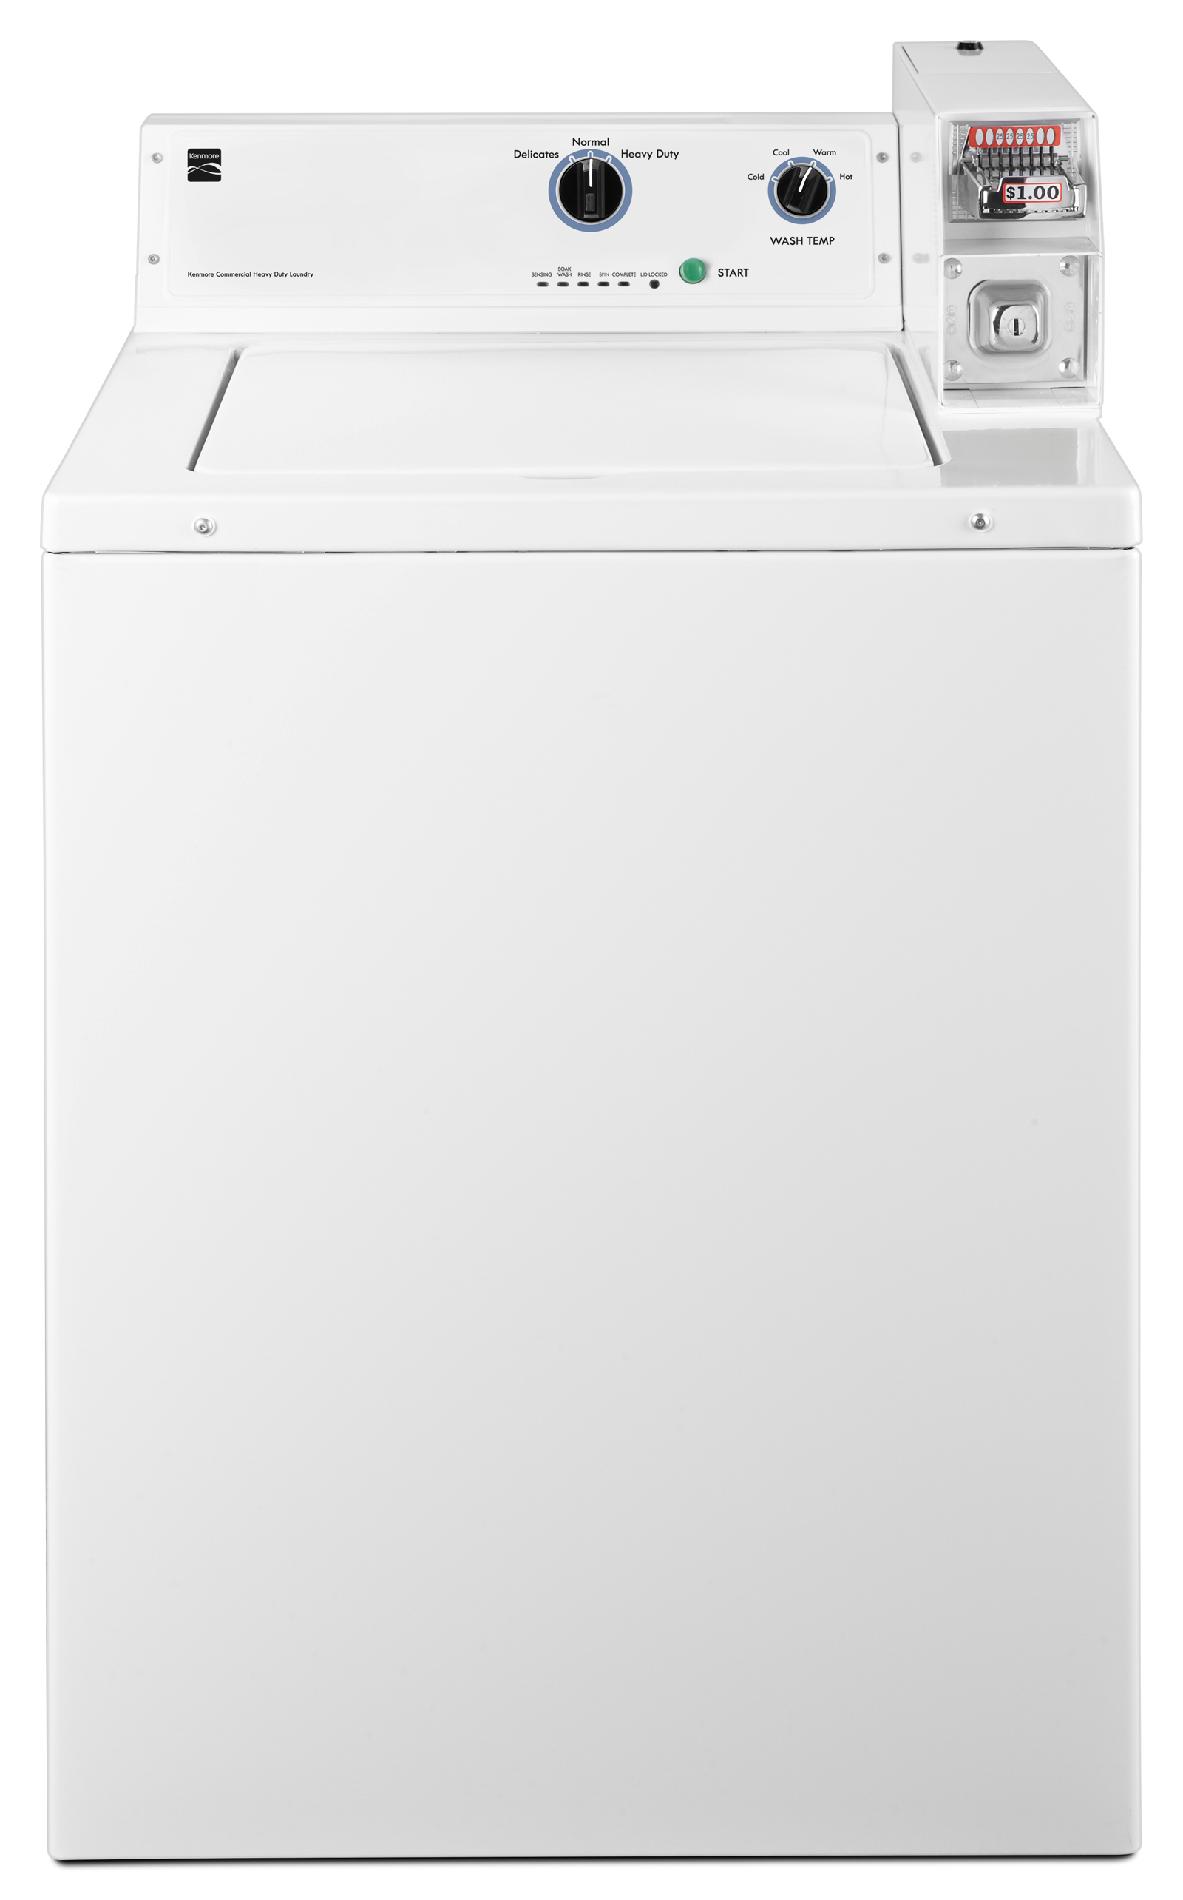 Kenmore 2.9 cu. ft. Coin-Operated Washer - White